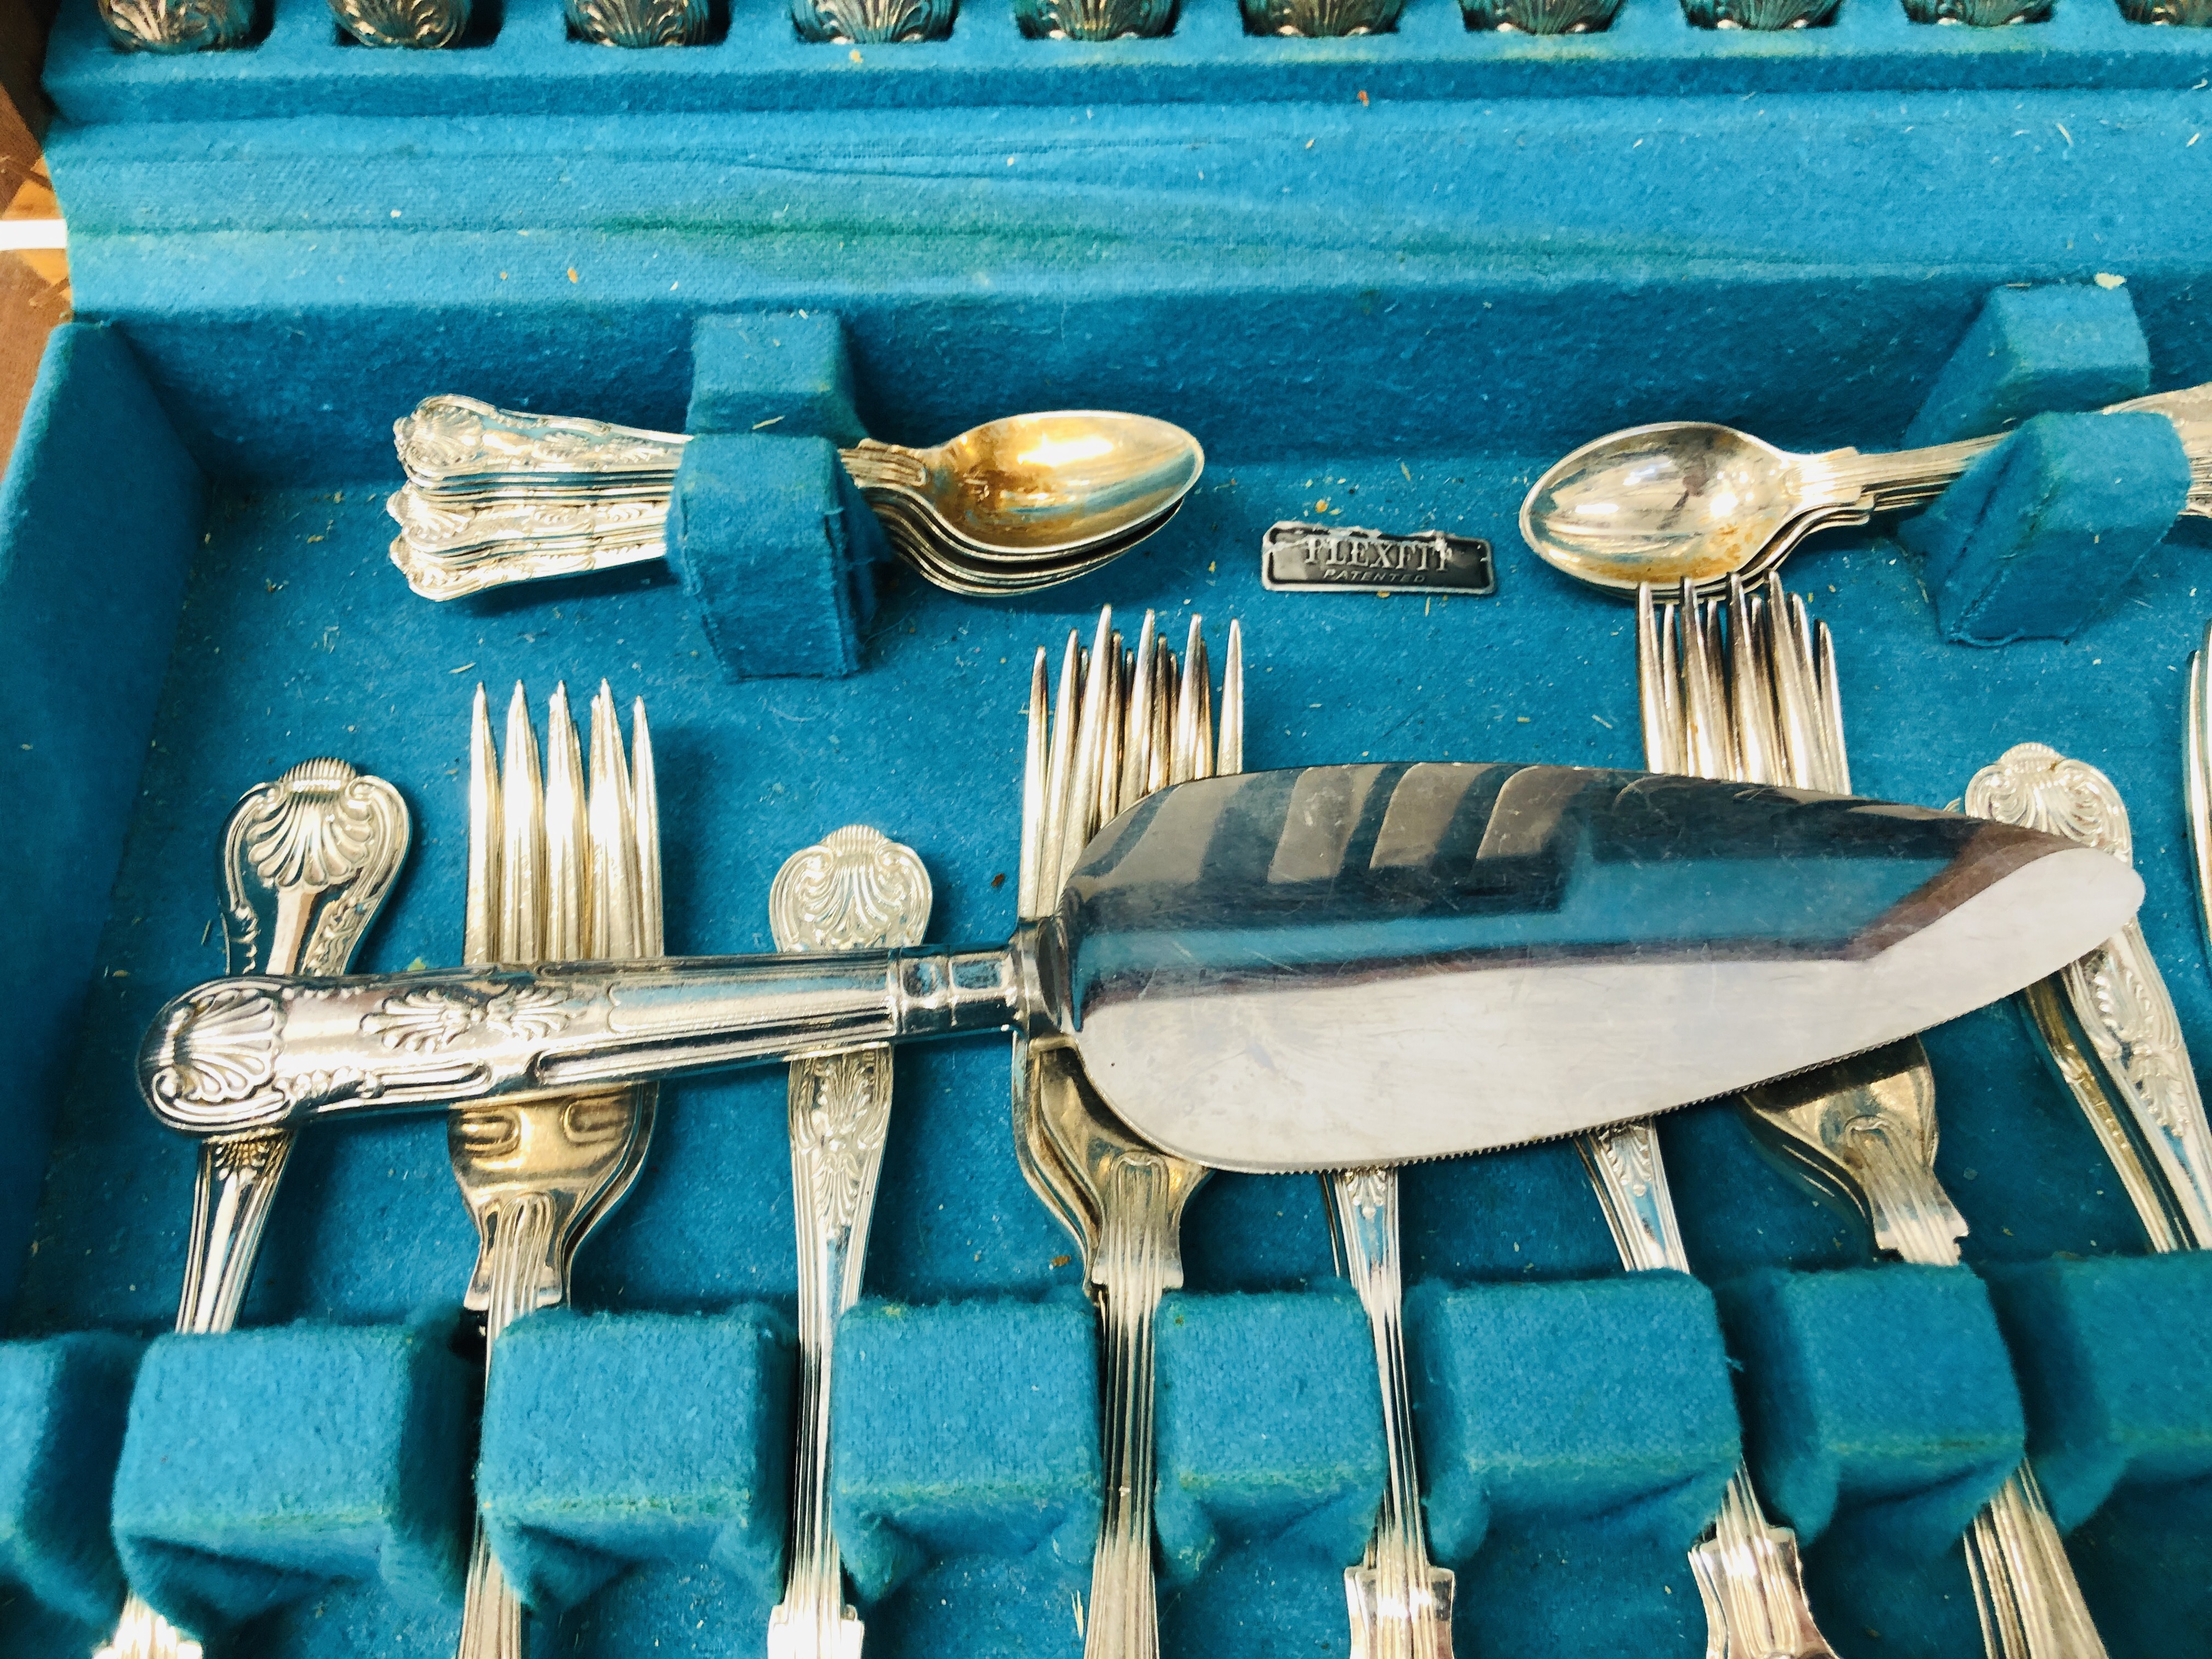 VINTAGE CANTEEN OF KINGSPATTERN CUTLERY (49 PIECES). - Image 5 of 9